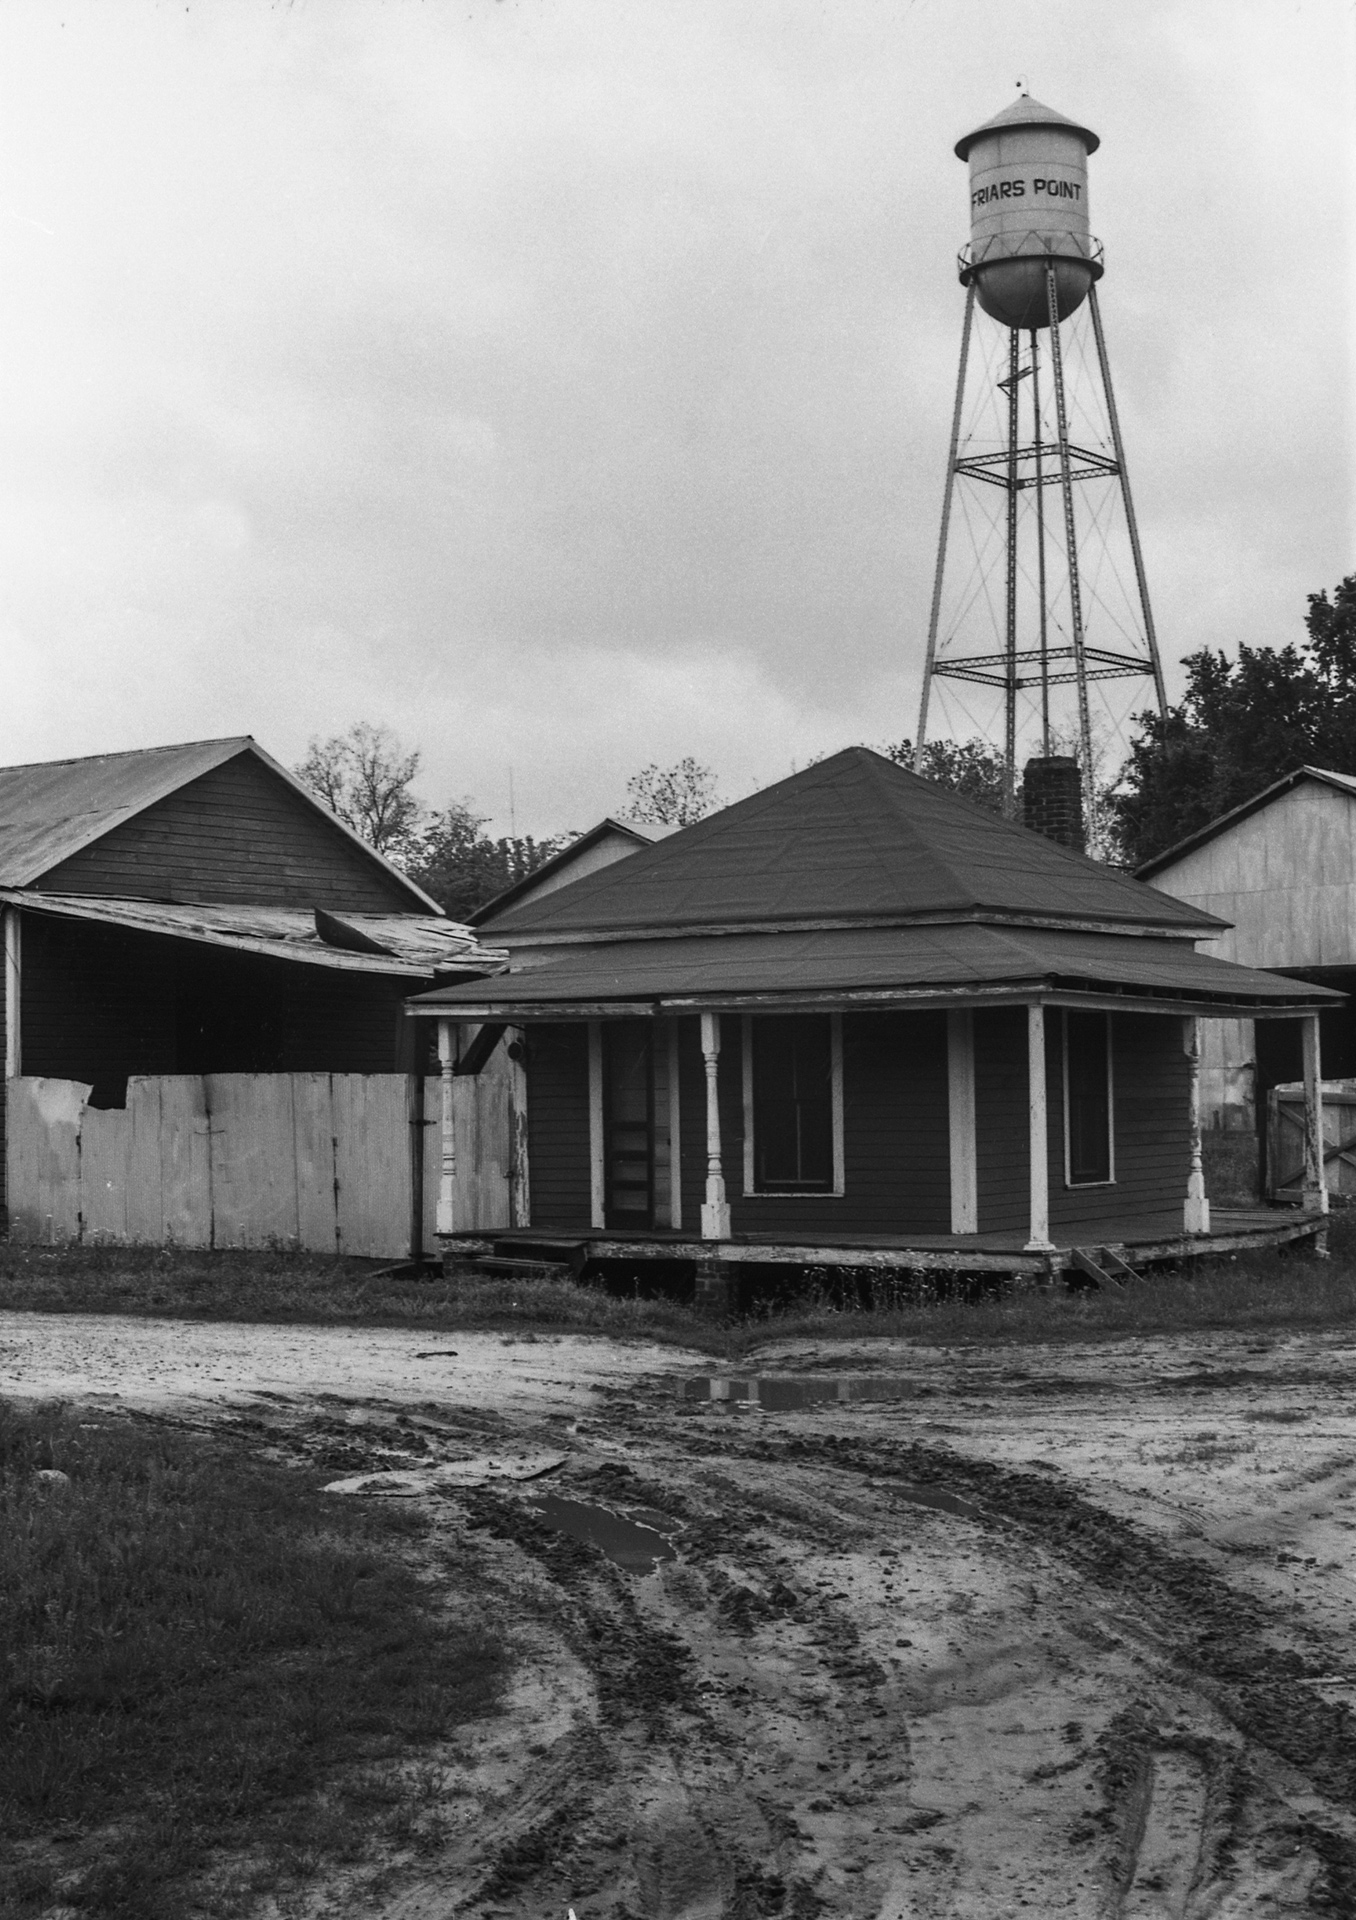 A water tower looming over the community of Friars Point, Mississippi. Photograph by Robert “Mack” McCormick. (Courtesy of Susannah Nix from the Robert “Mack” McCormick Collection, Archives
Center, National Museum of American History)